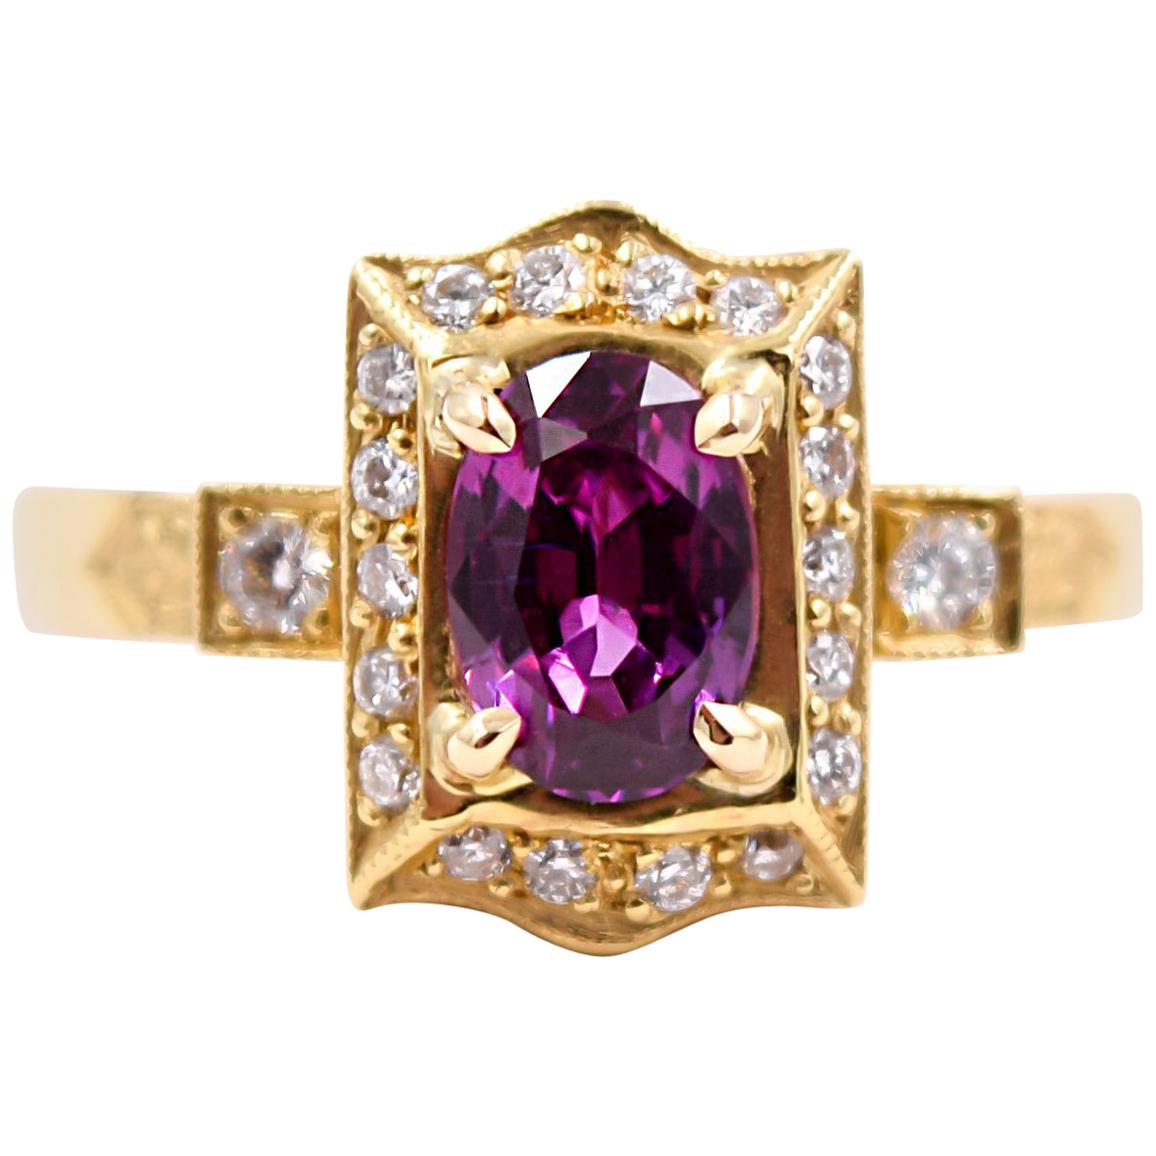 Carl Priolo 1.10 Carat Oval Pink Sapphire and Diamond Statement Ring in 18K Gold For Sale